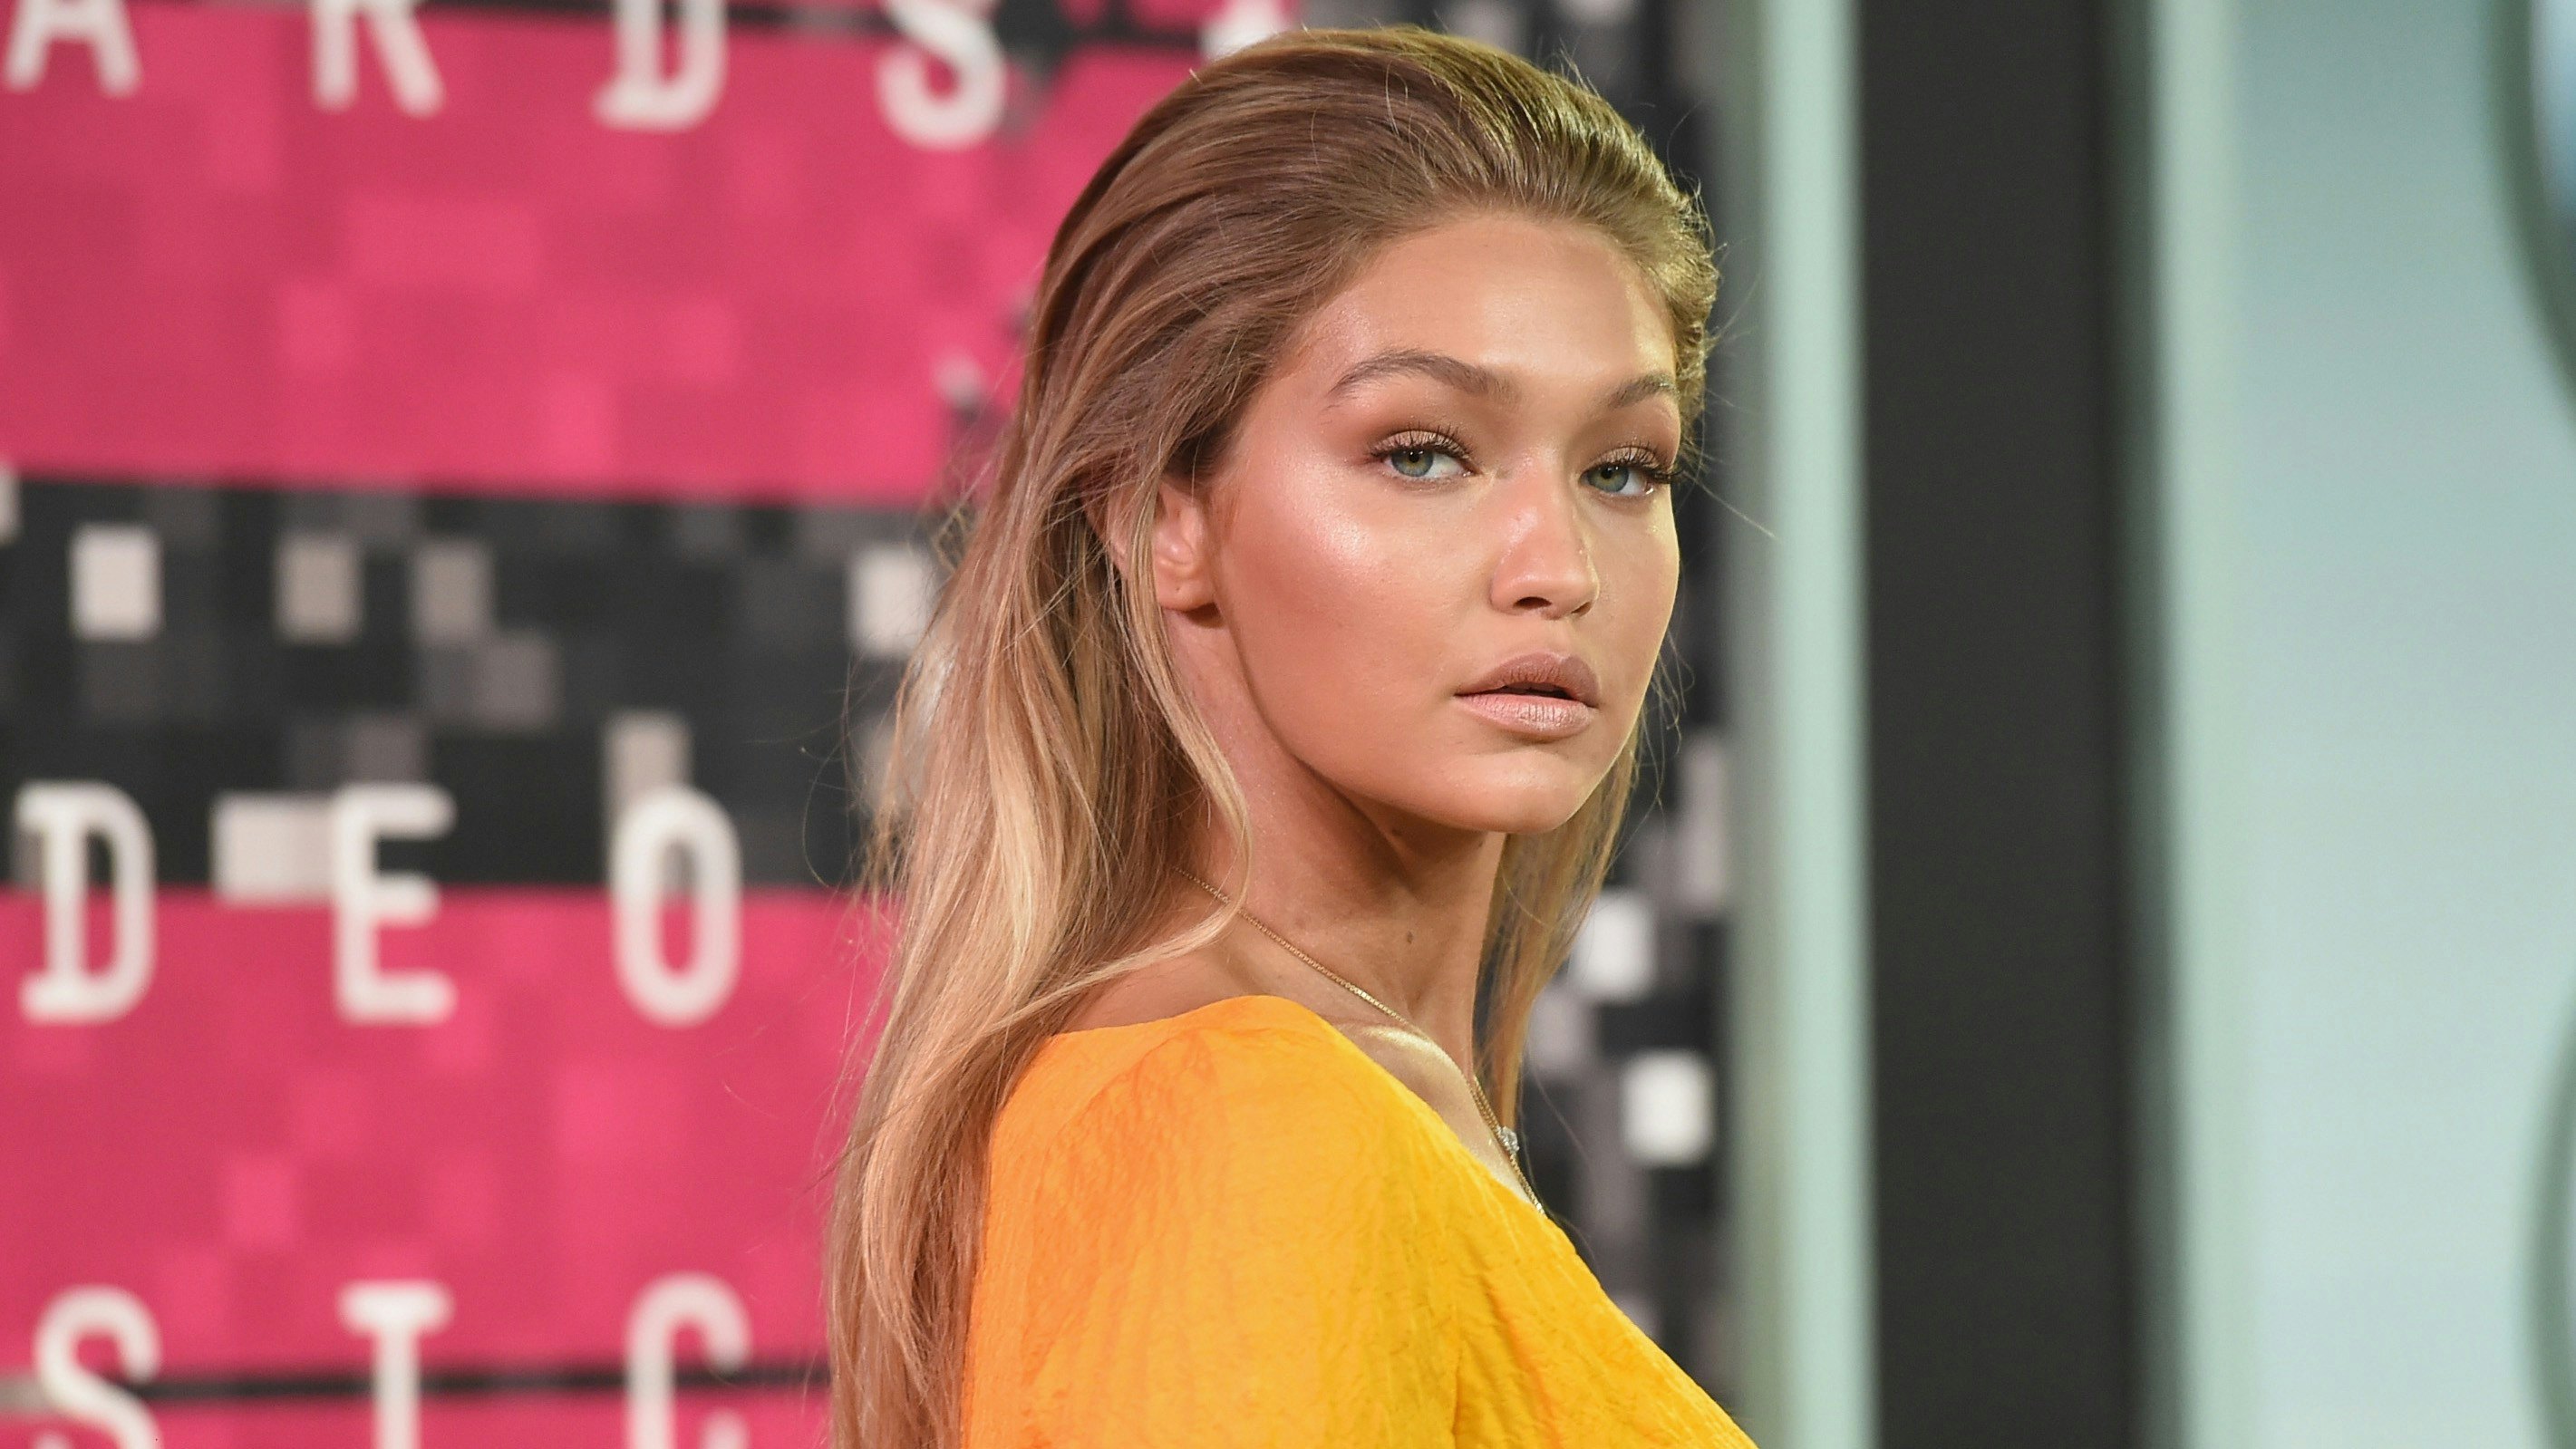 Gigi Hadid Confirms She'll Be Returning to the Victoria's Secret